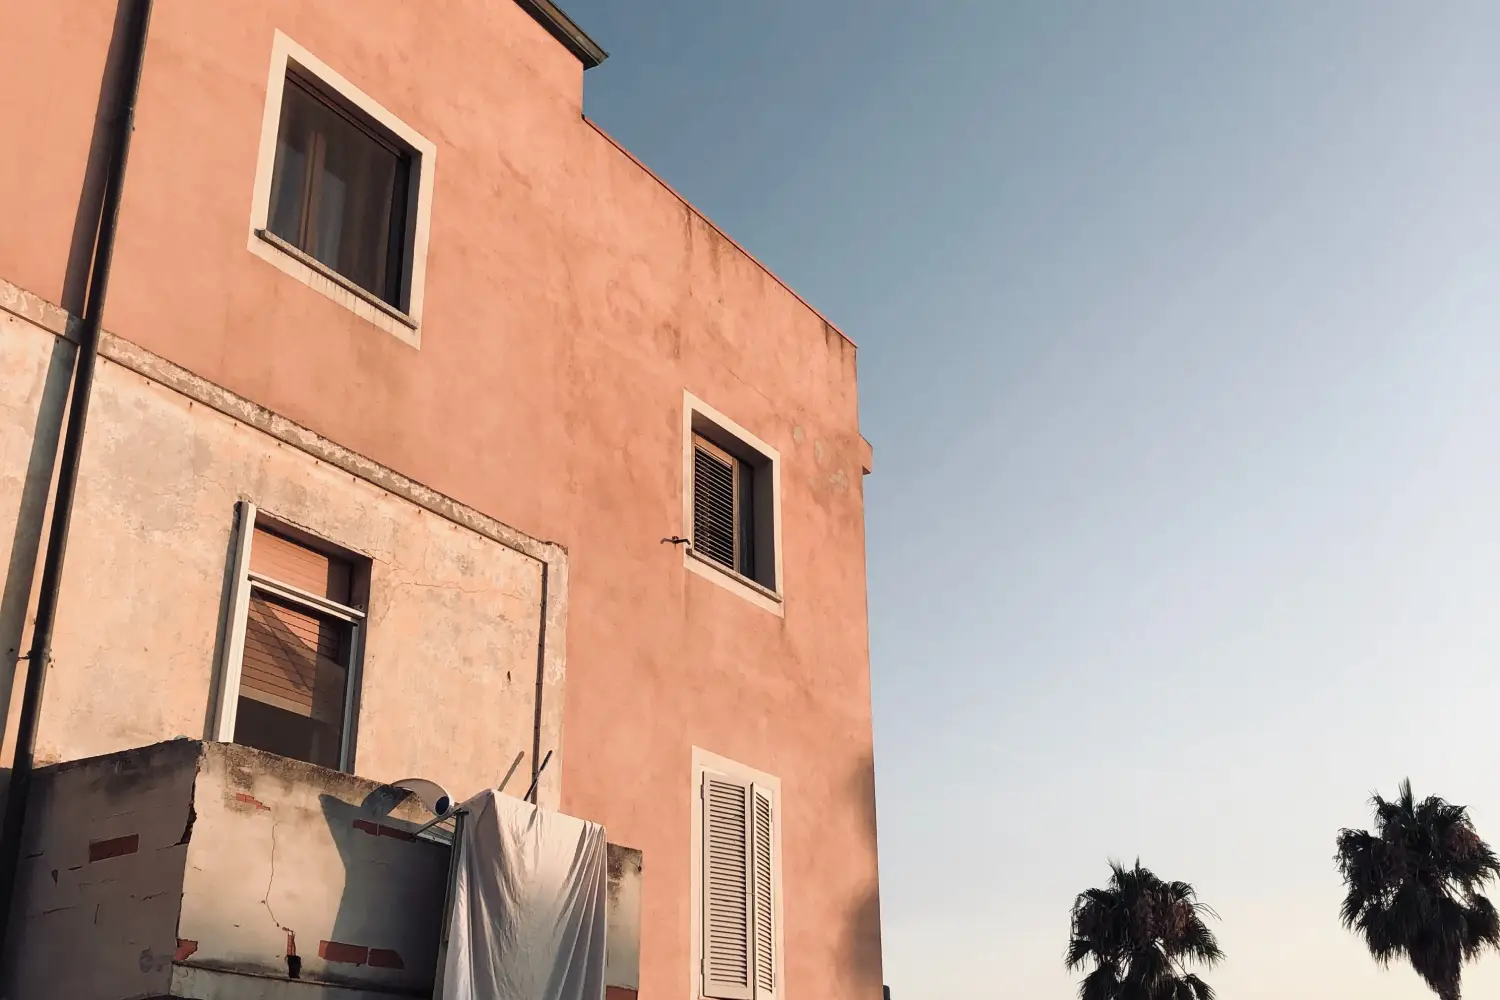 Ferry to Golfo Aranci - Dusky scenery is leaving playful its light marks on an old building.